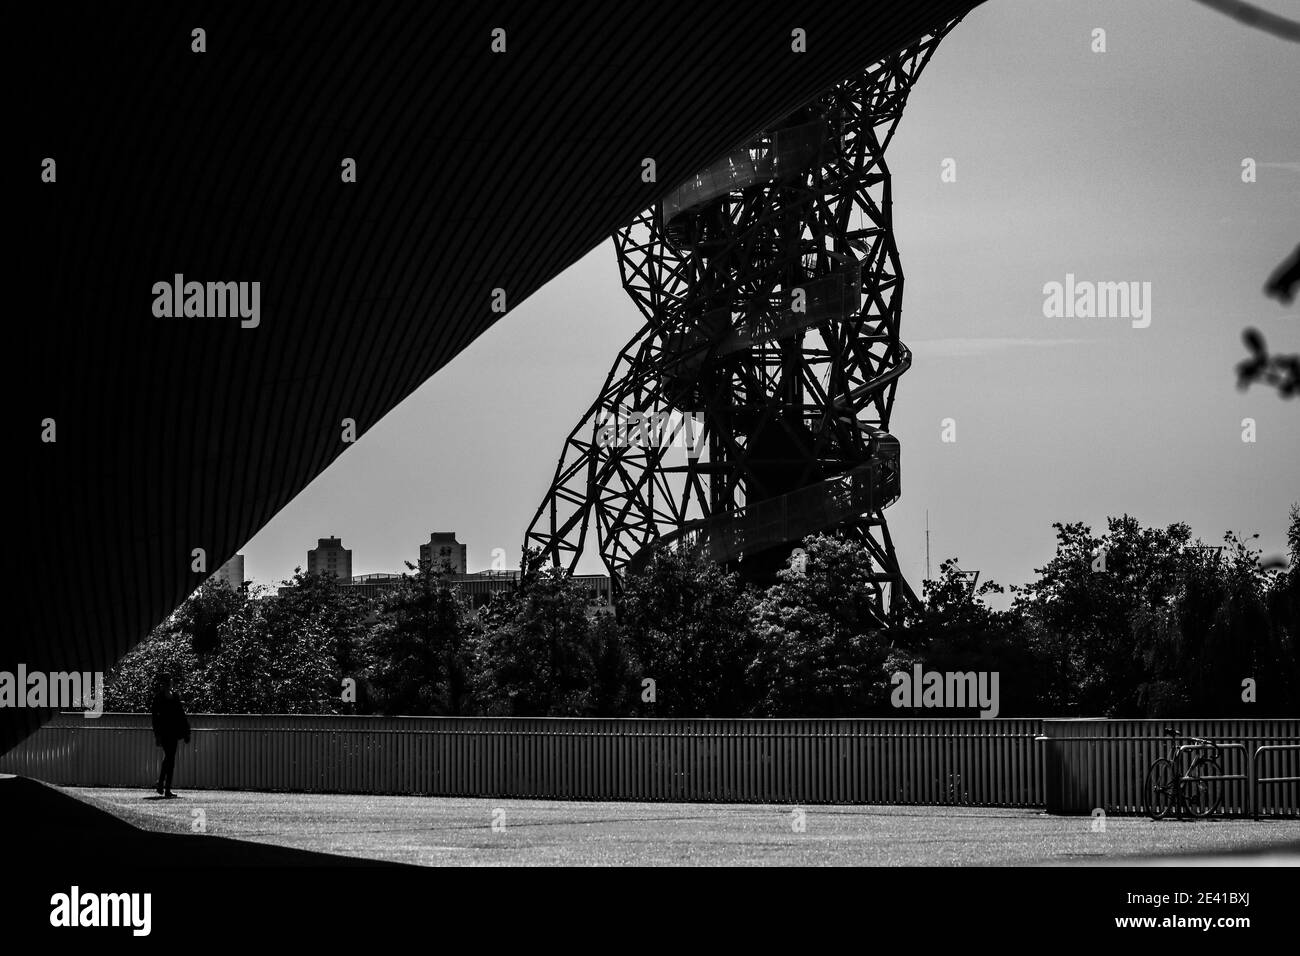 A single person stands, dwarfed by the London Olympic aquatics centre, with the ArcelorMittal Orbit tower in the background. Stock Photo